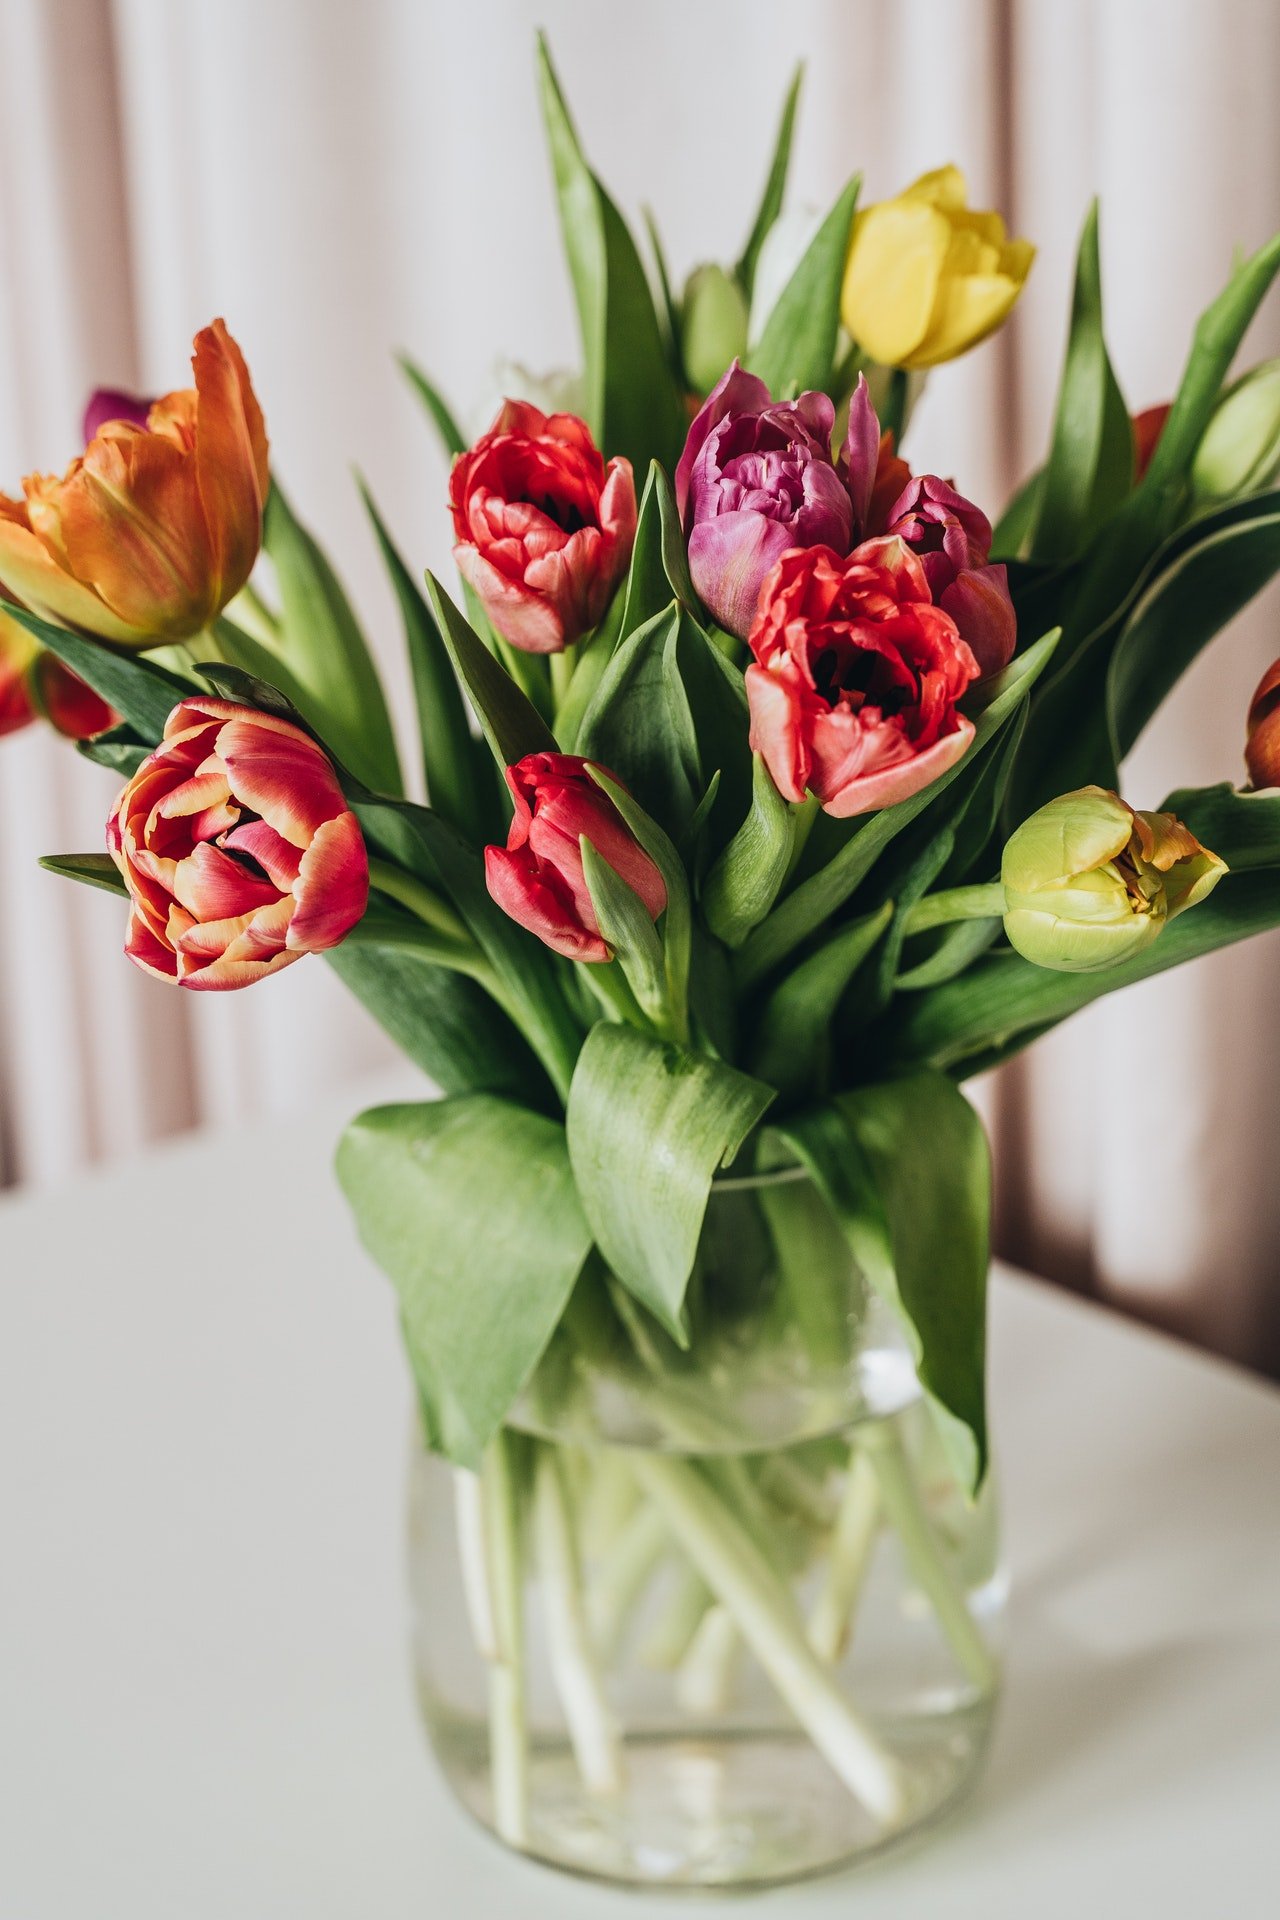 He came back from Miami with gifts and flowers for Clara. | Source: Pexels